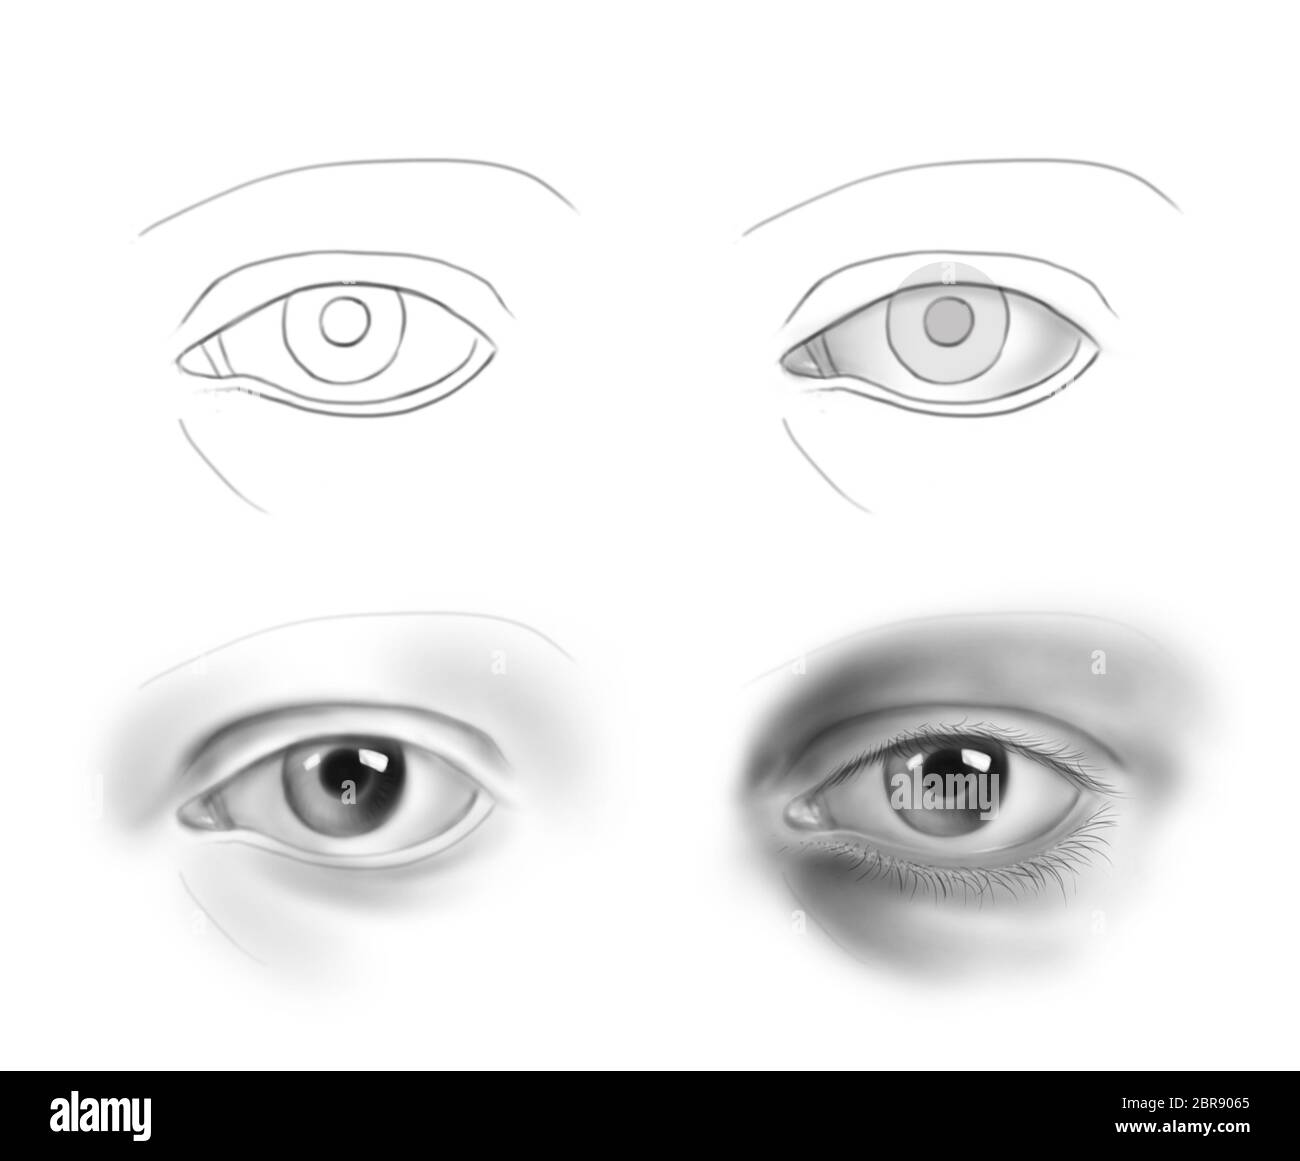 How to Draw a Human Eye - Instructables